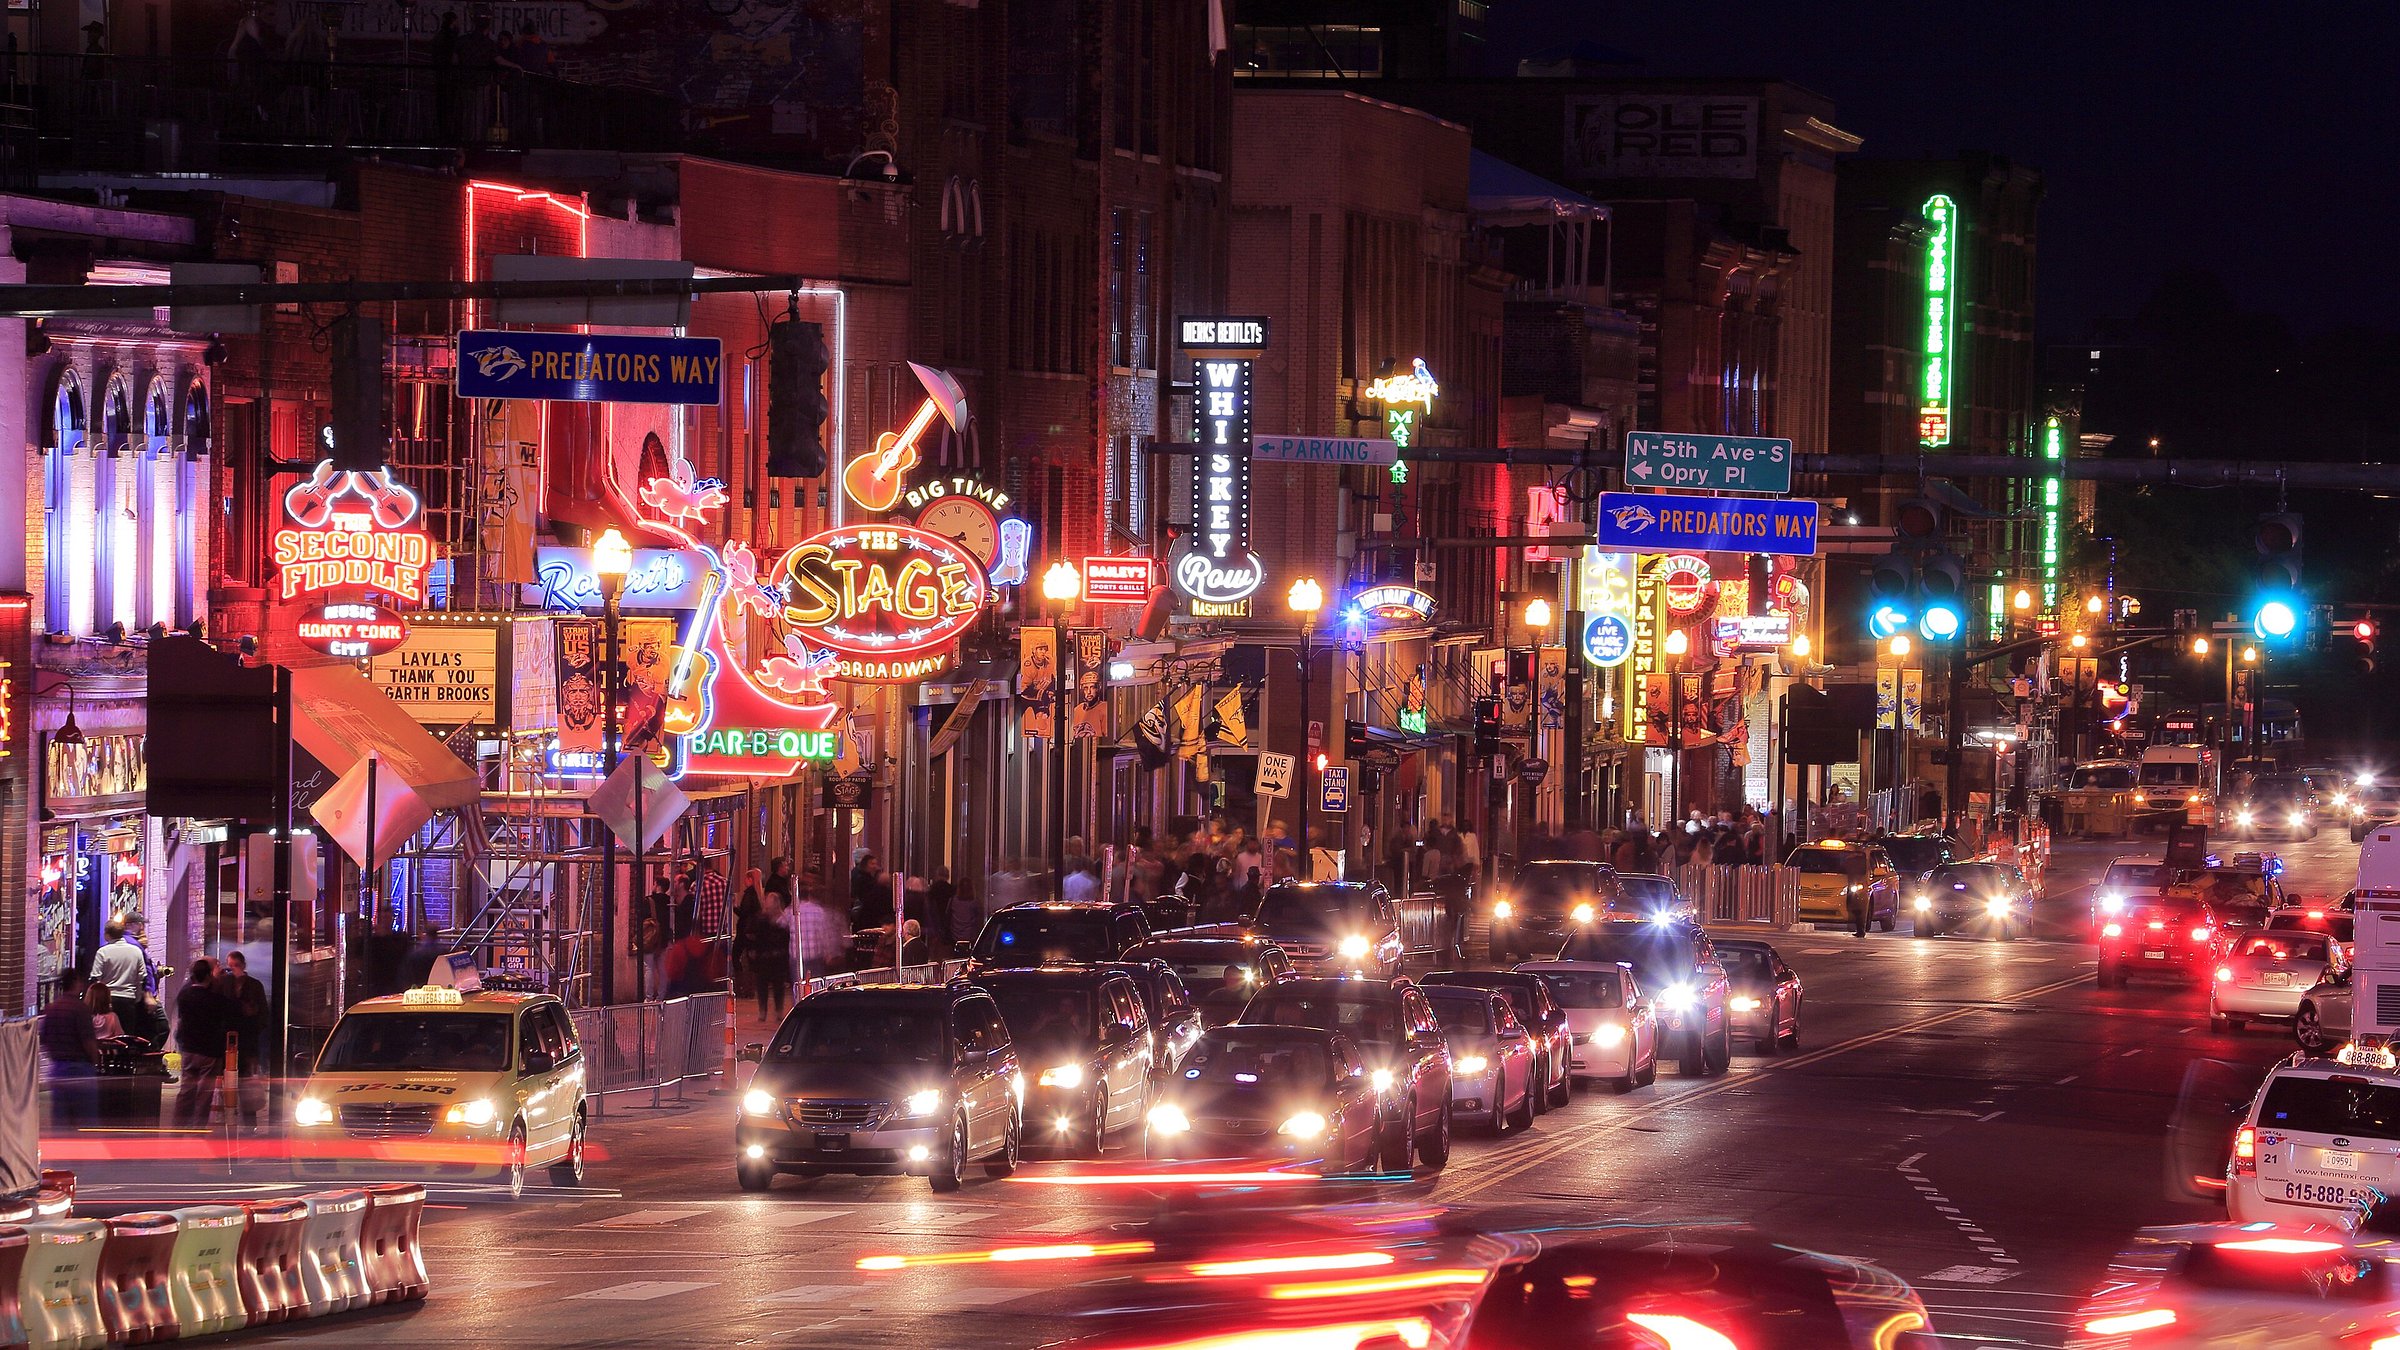 Nashville music scene Mustvisit venues for country, local songwriters